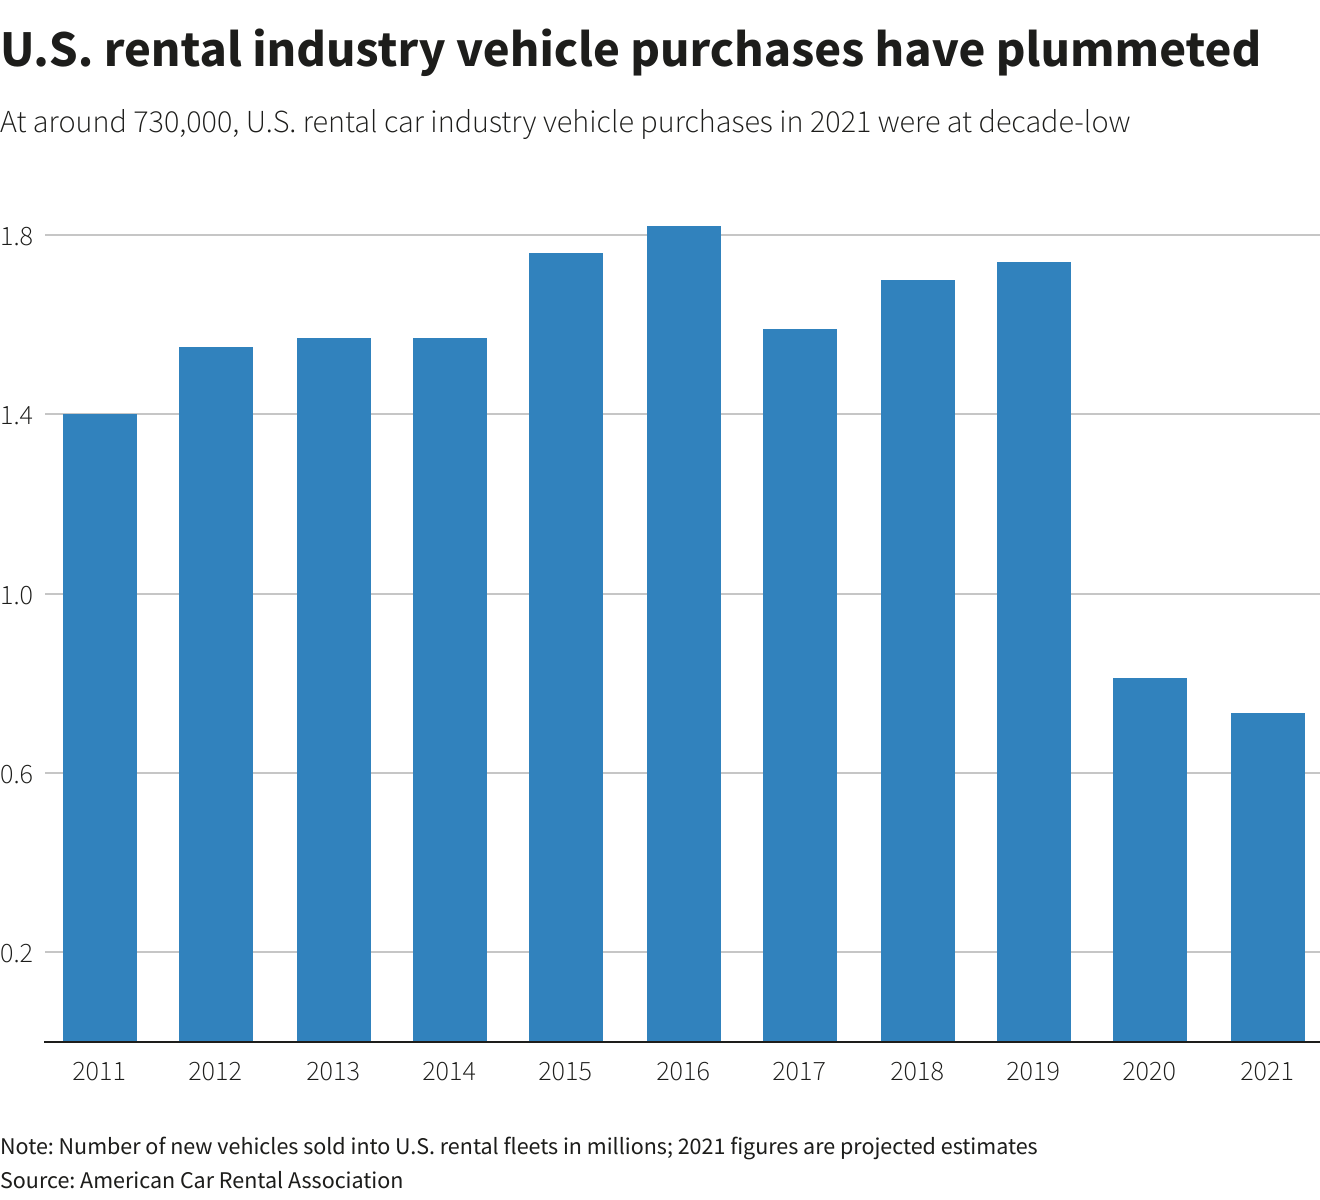 U.S. rental industry vehicle purchases have plummeted